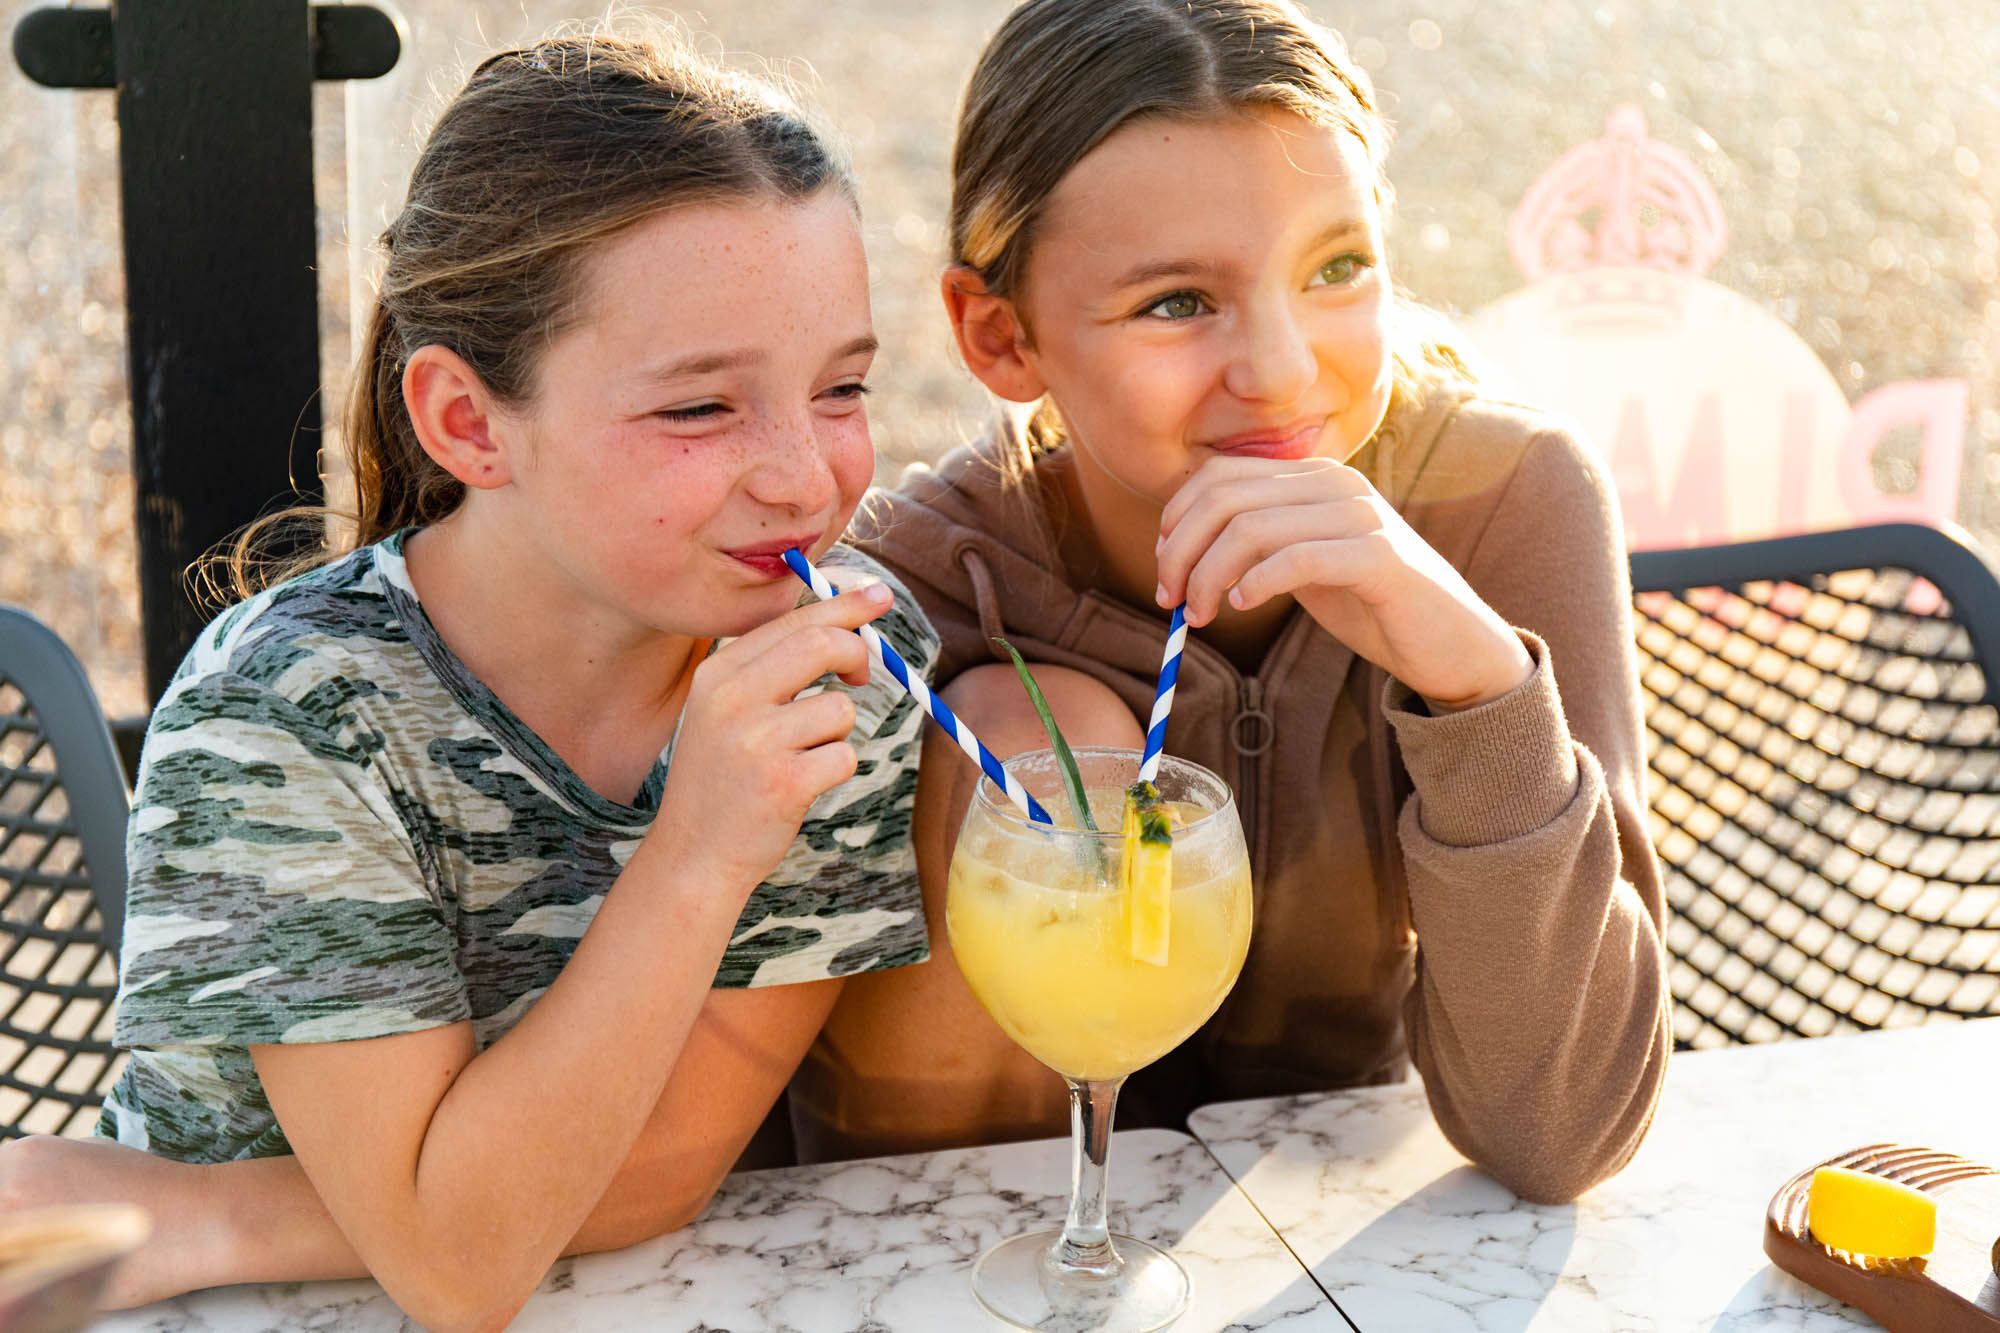 Two girls sharing a drink on the beach on a sunny day.